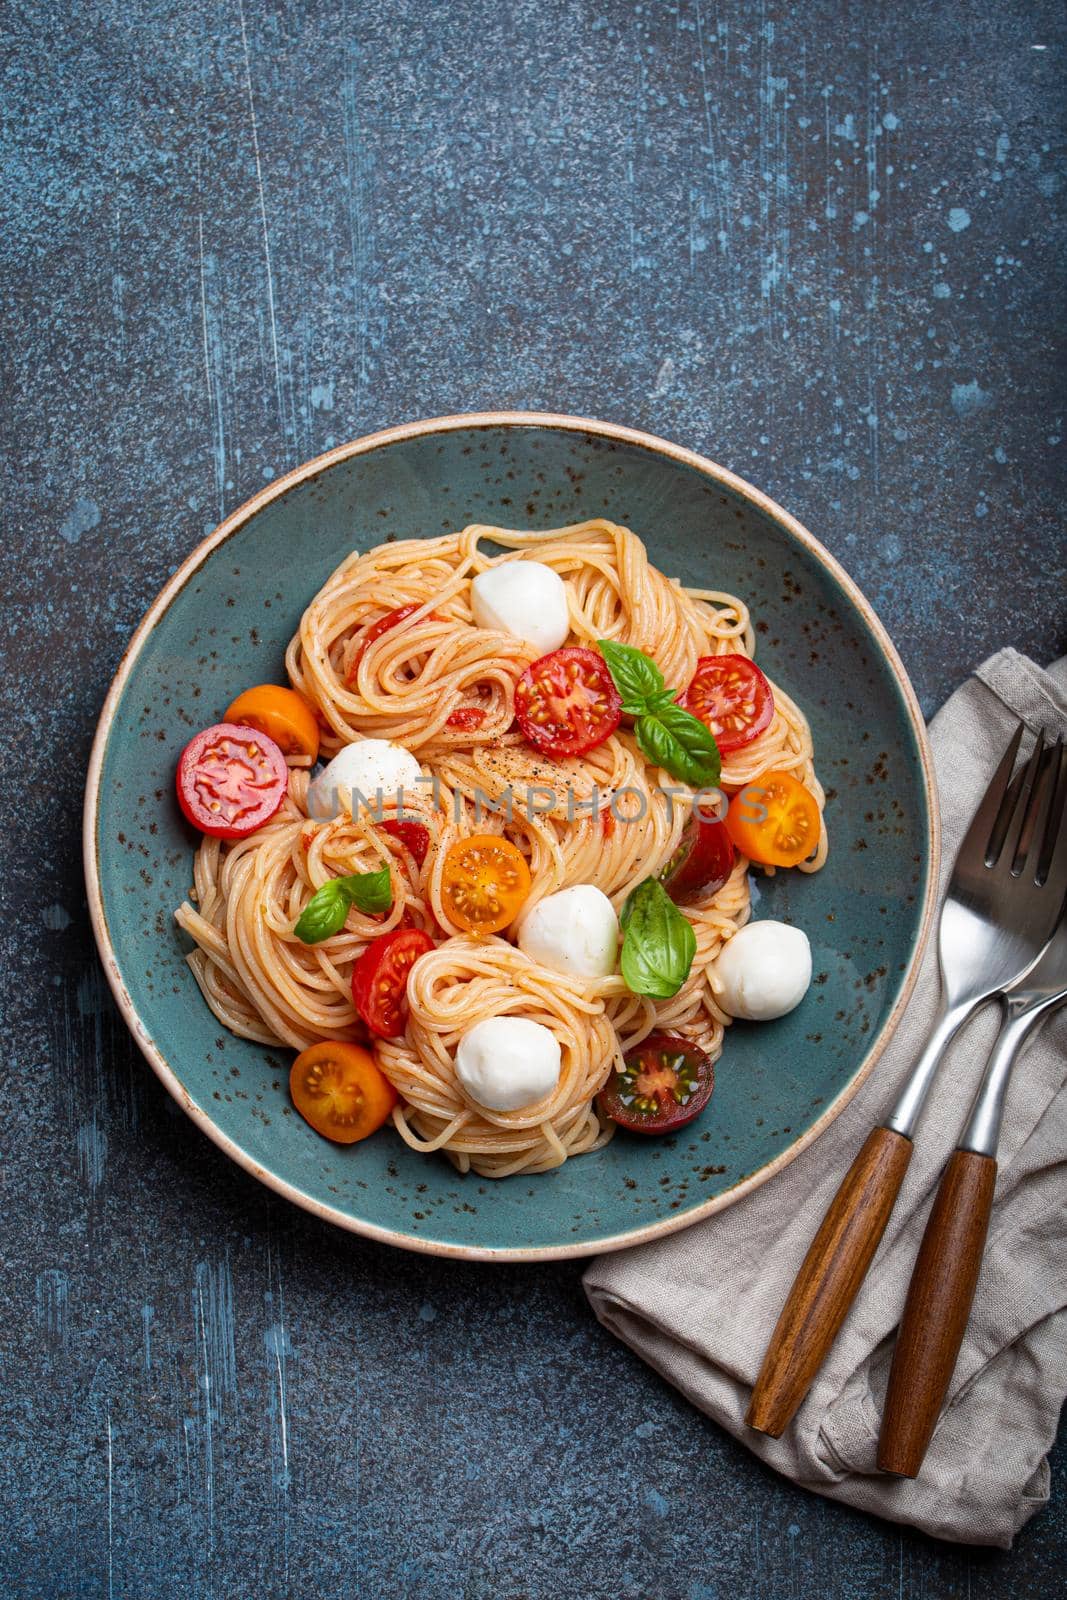 Delicious spaghetti with mozzarella, colourful cherry tomatoes, fresh basil on ceramic plate on rustic stone background top view. Italian healthy tasty food pasta for dinner or lunch